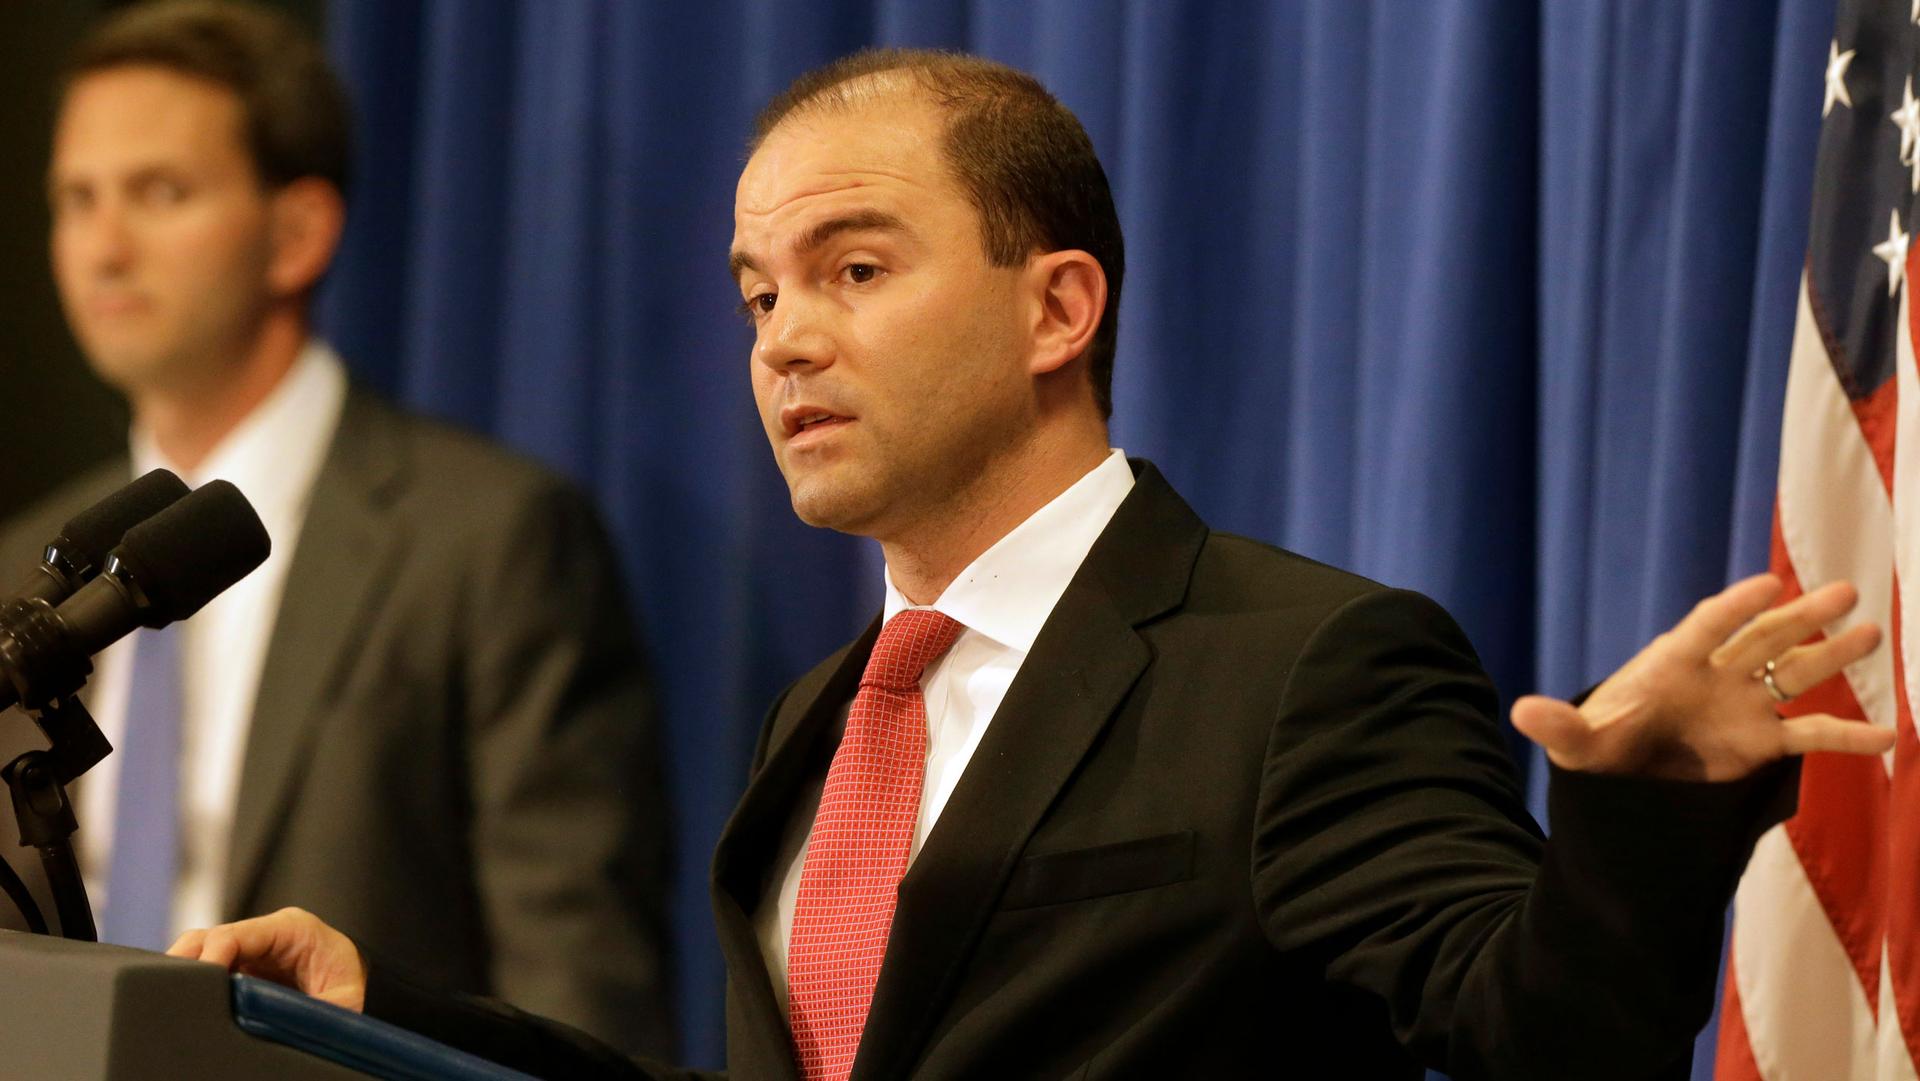 Deputy National Security Adviser for Strategic Communications and Speechwriting Ben Rhodes is accompanied by Deputy Press Secretary Eric Schultz at a press briefing at Martha's Vineyard